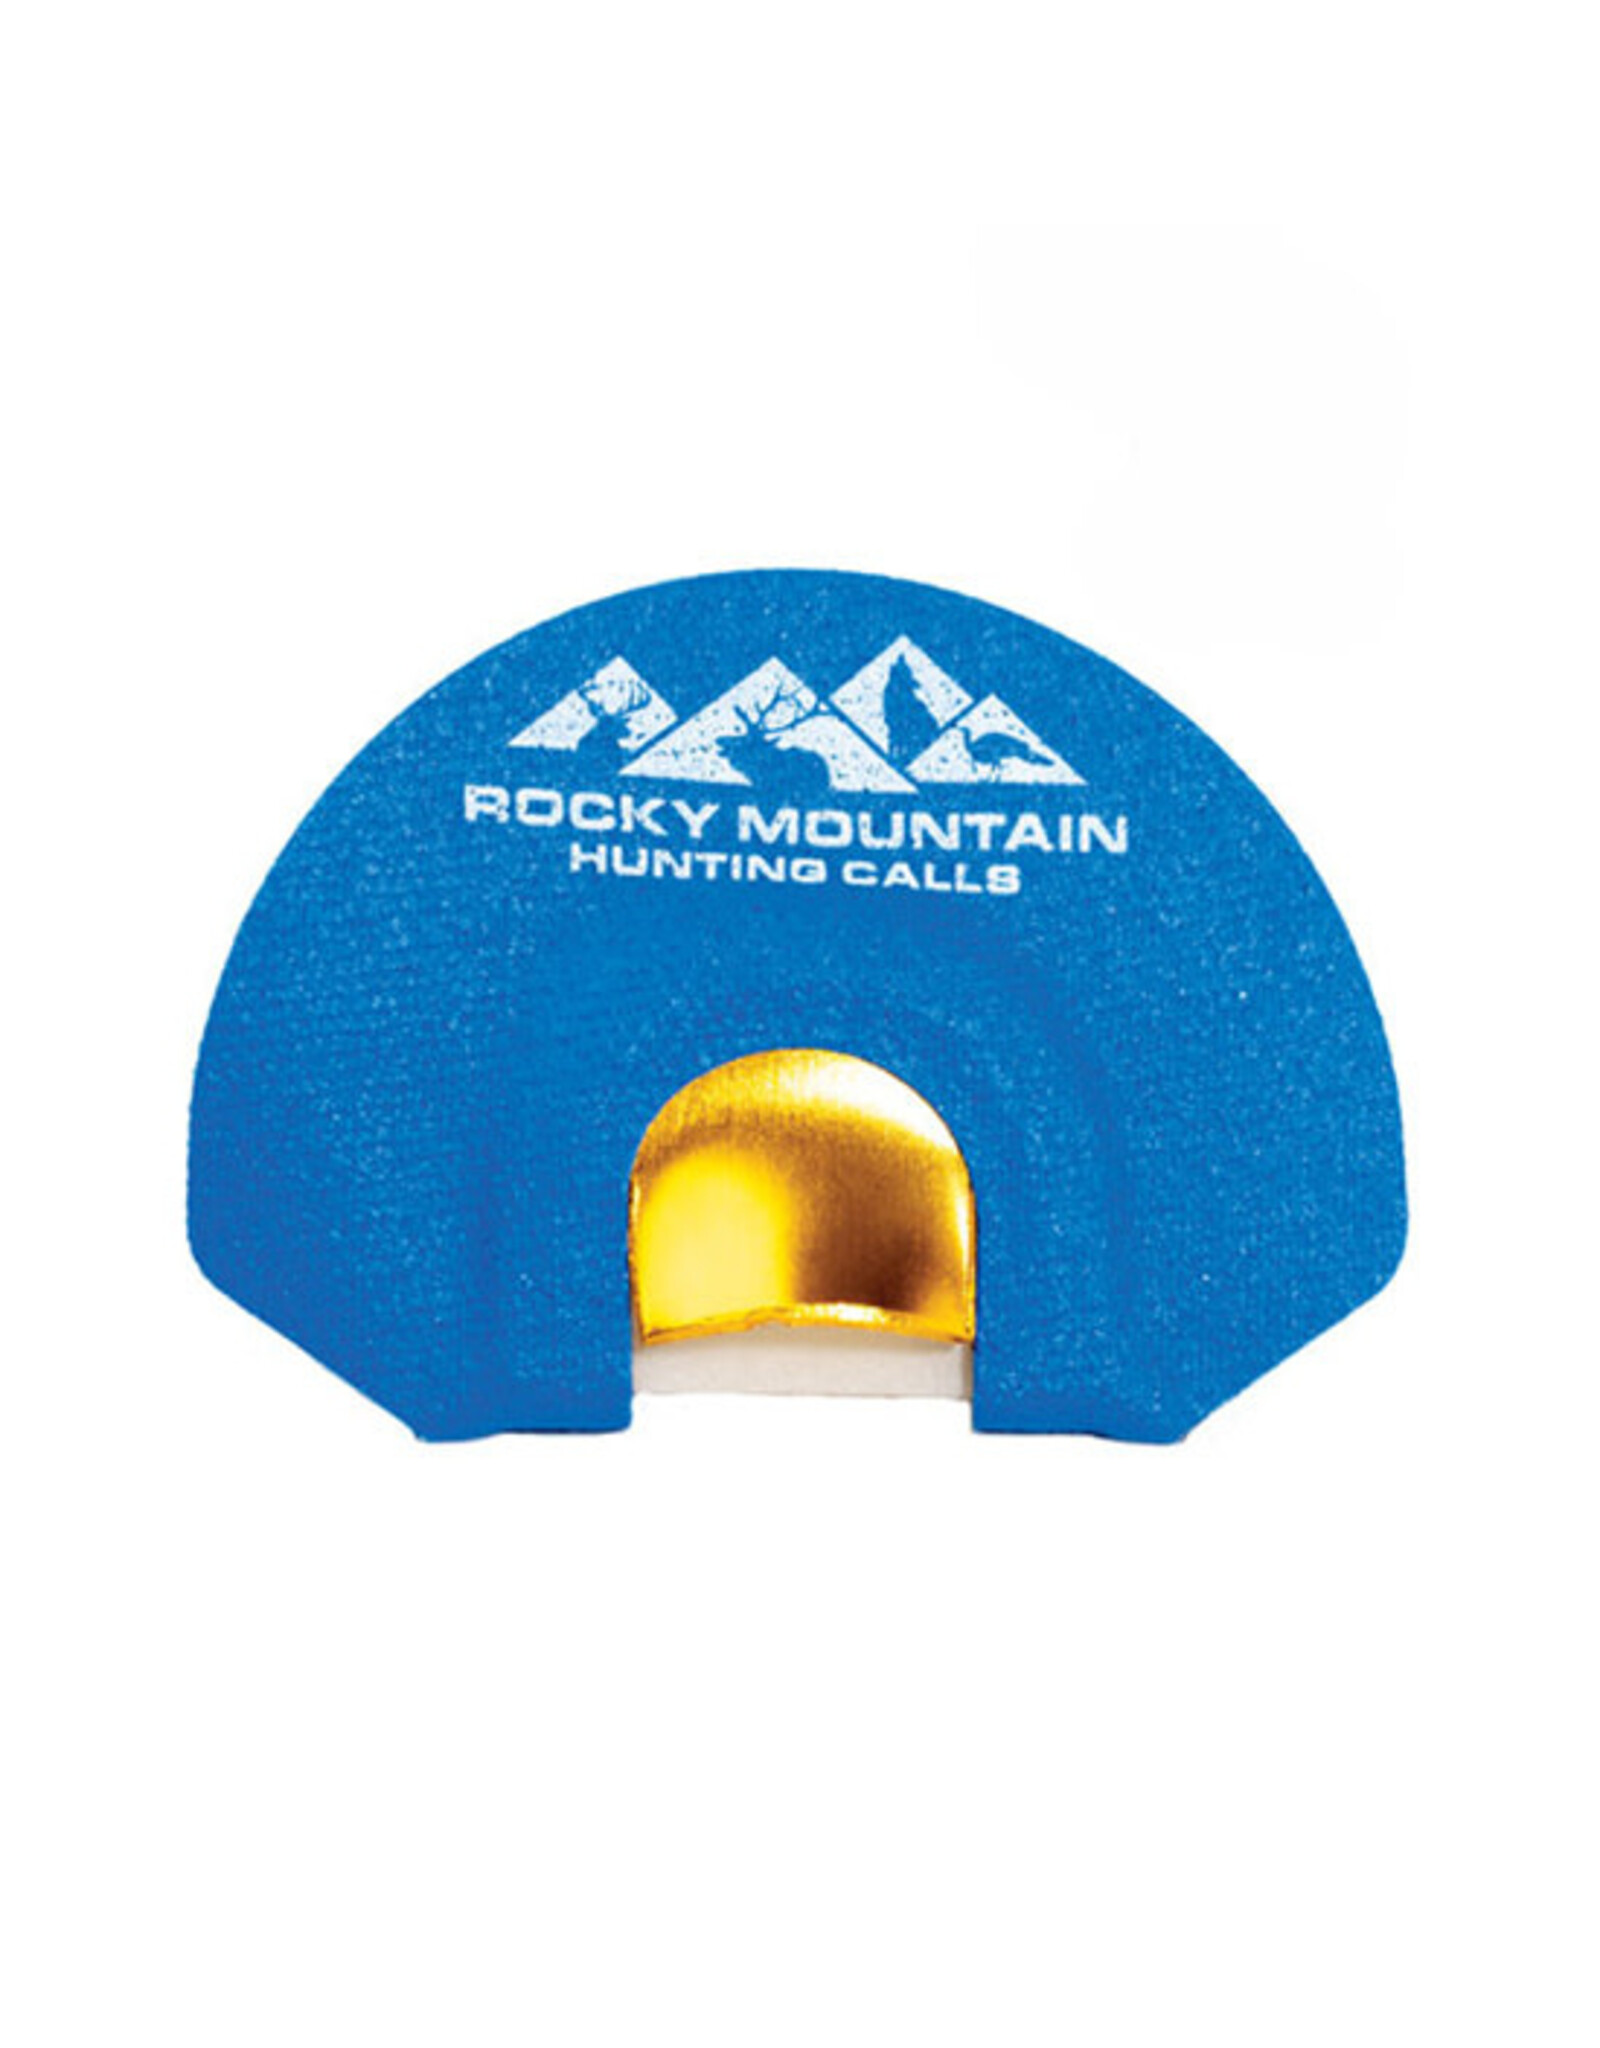 Rocky Mountain Hunting Calls - "The Reaper" - Elk Diaphragm Call